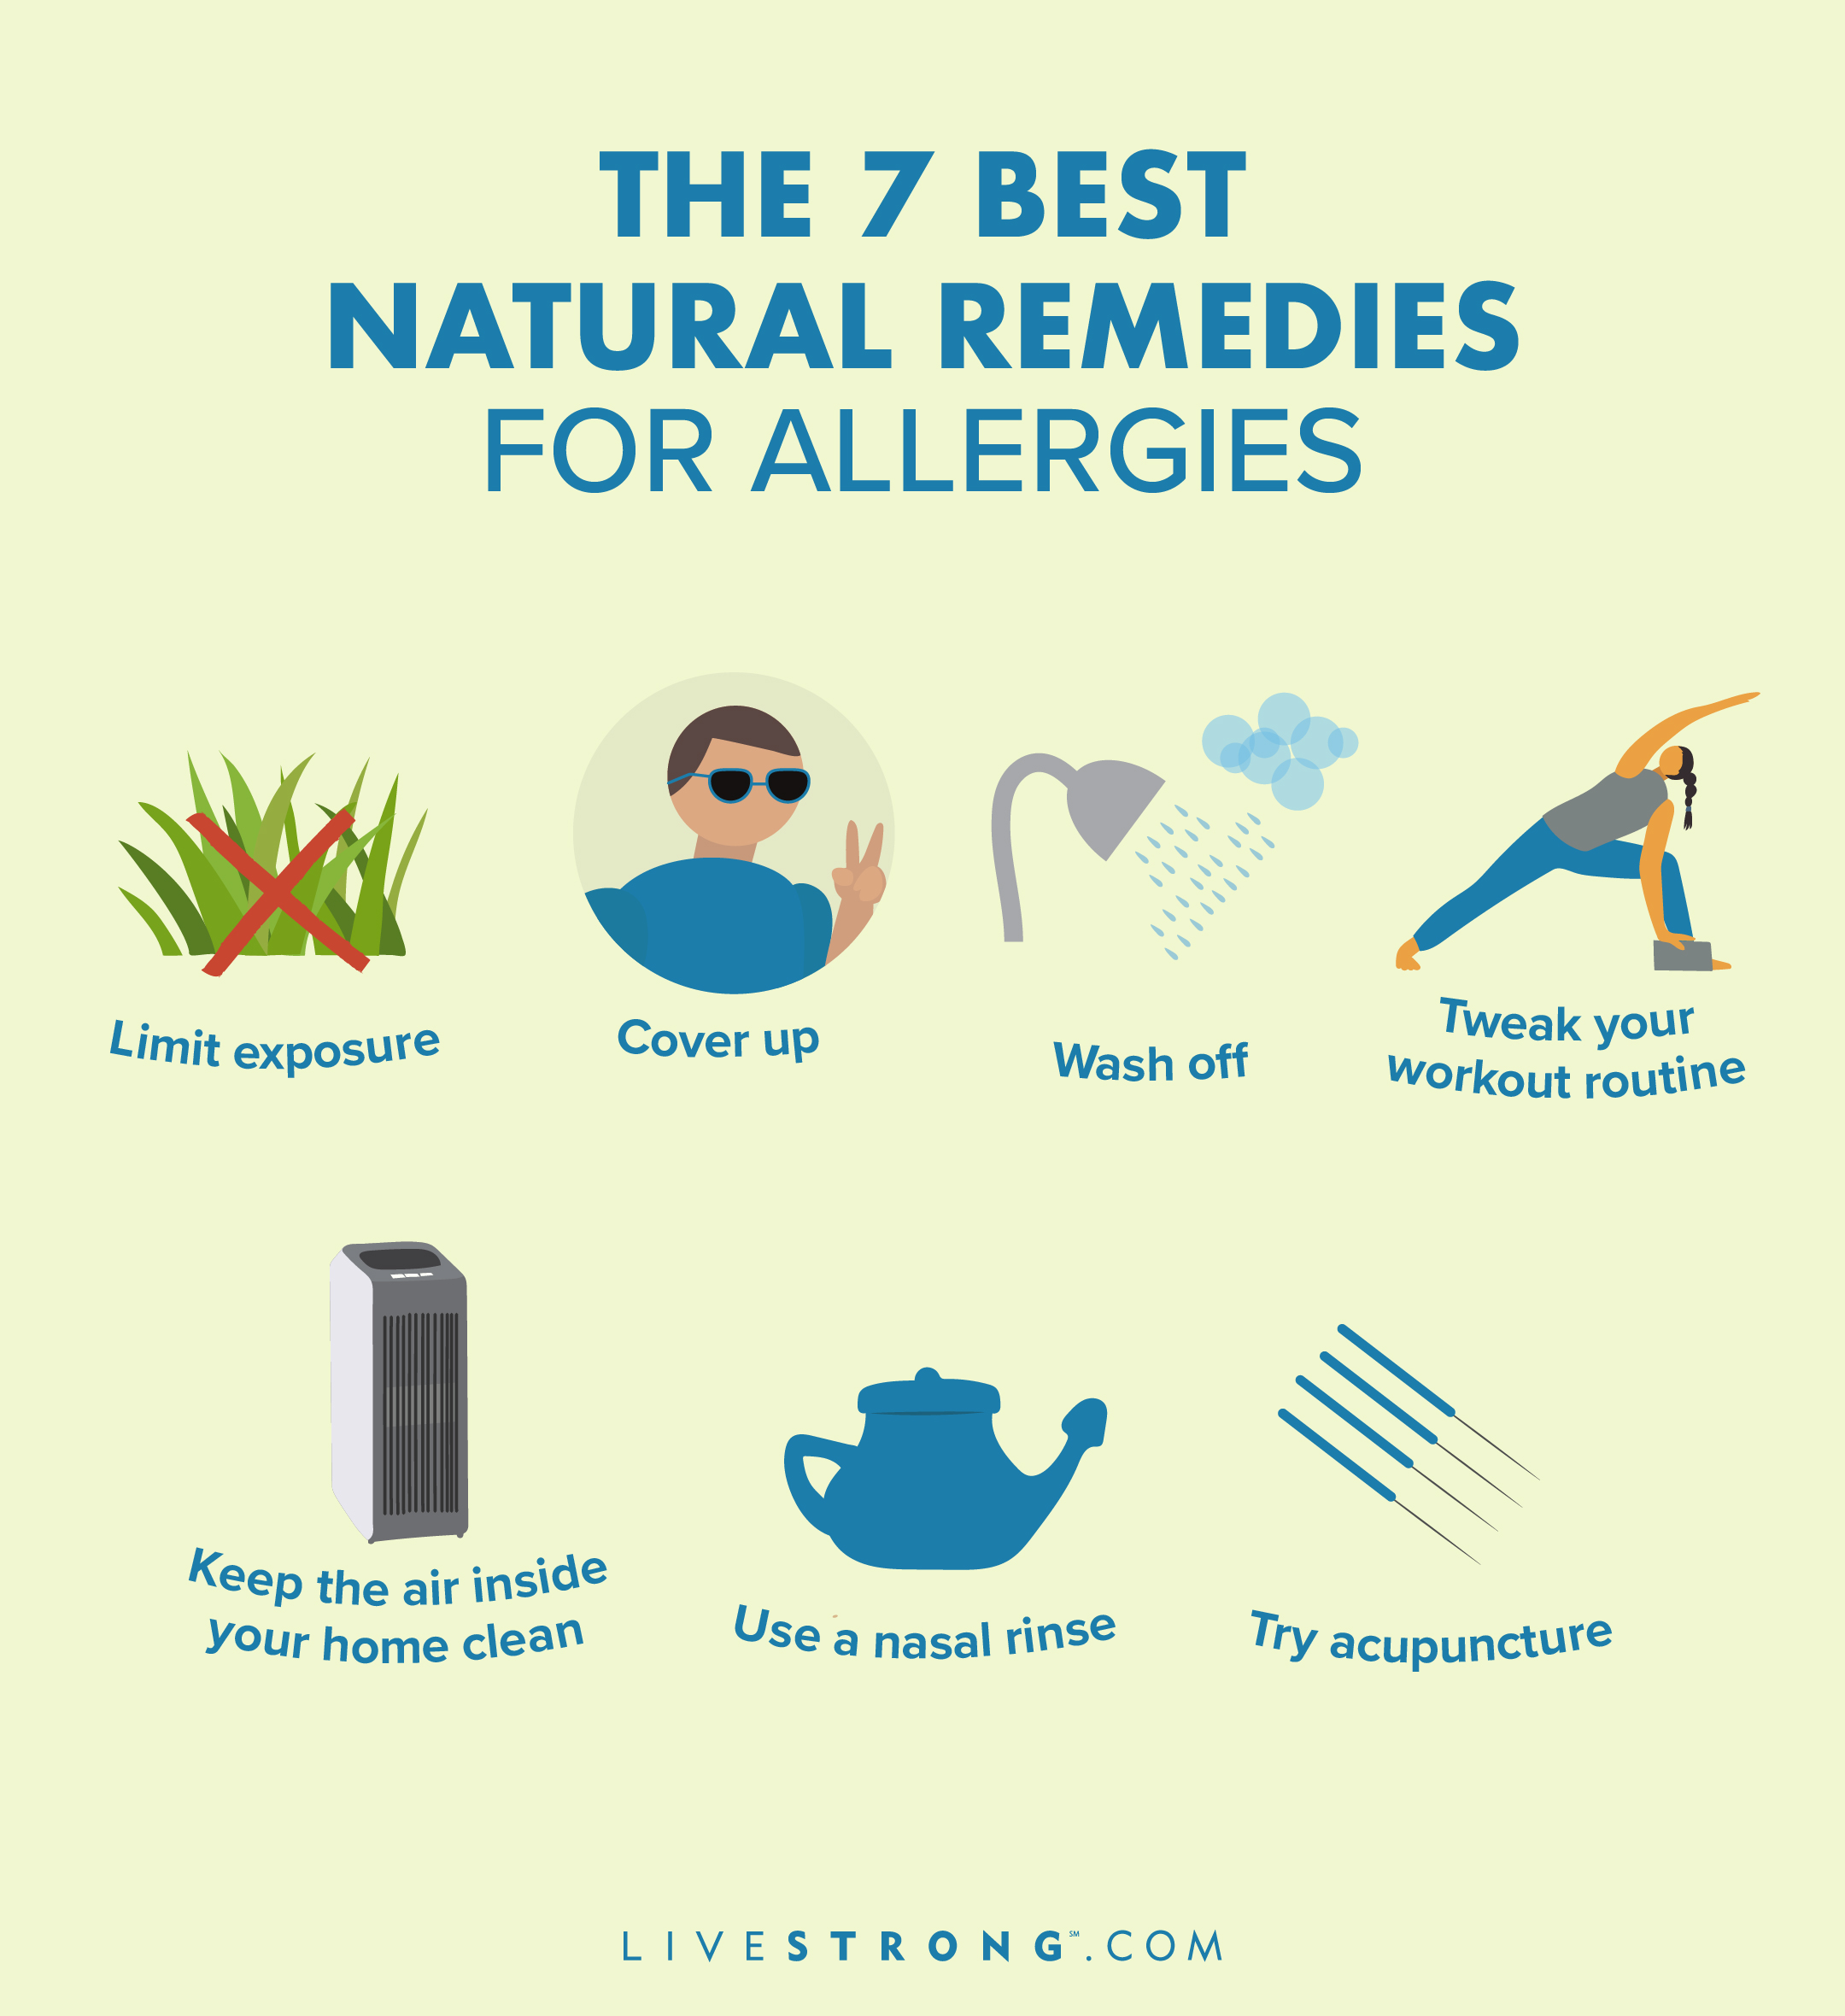 Herbal remedies for allergies and hay fever